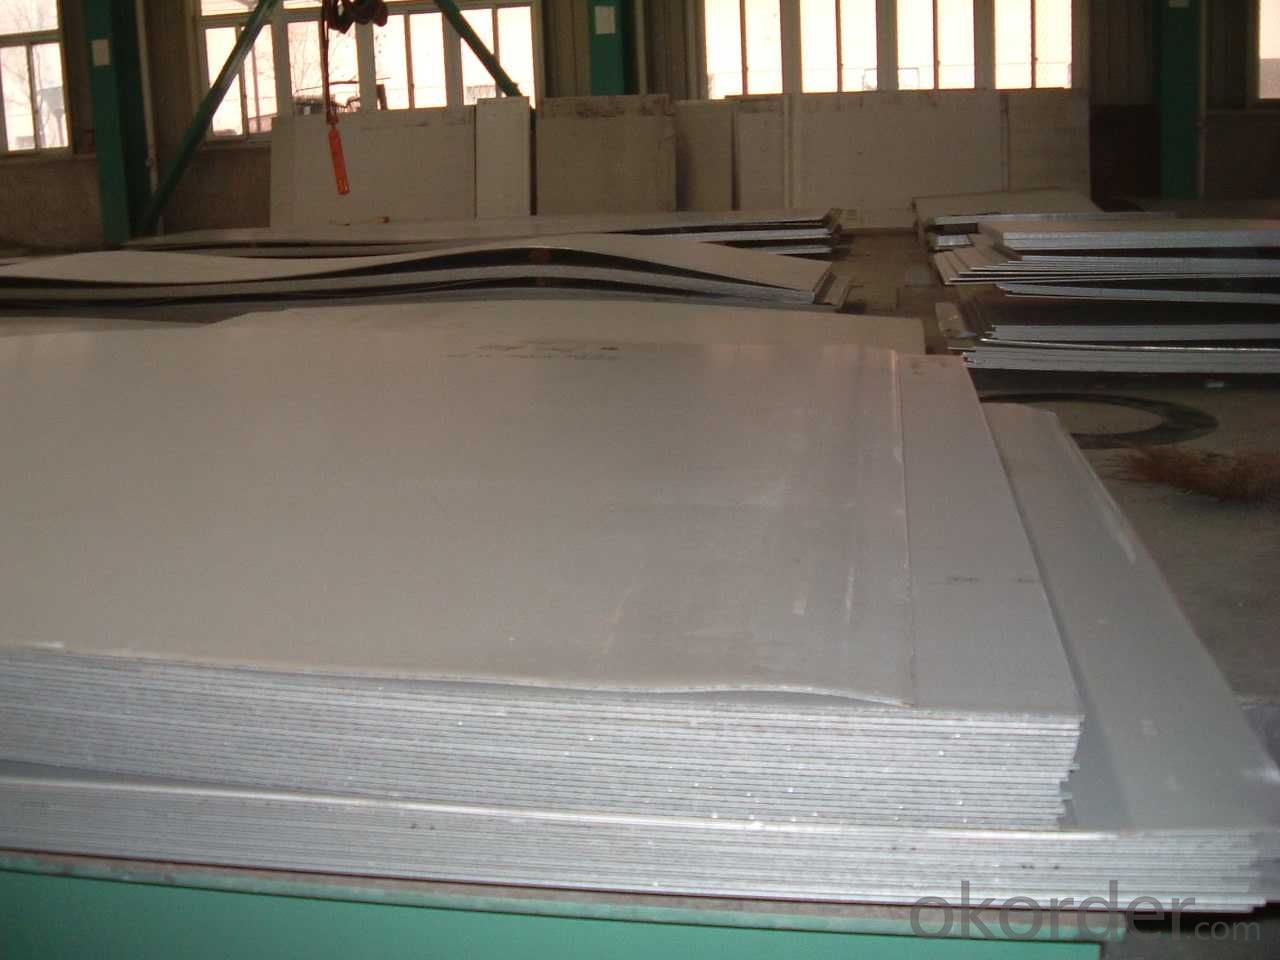 Stainless Steel Sheet 0.8mm thickness with No.4 Surface Treatment